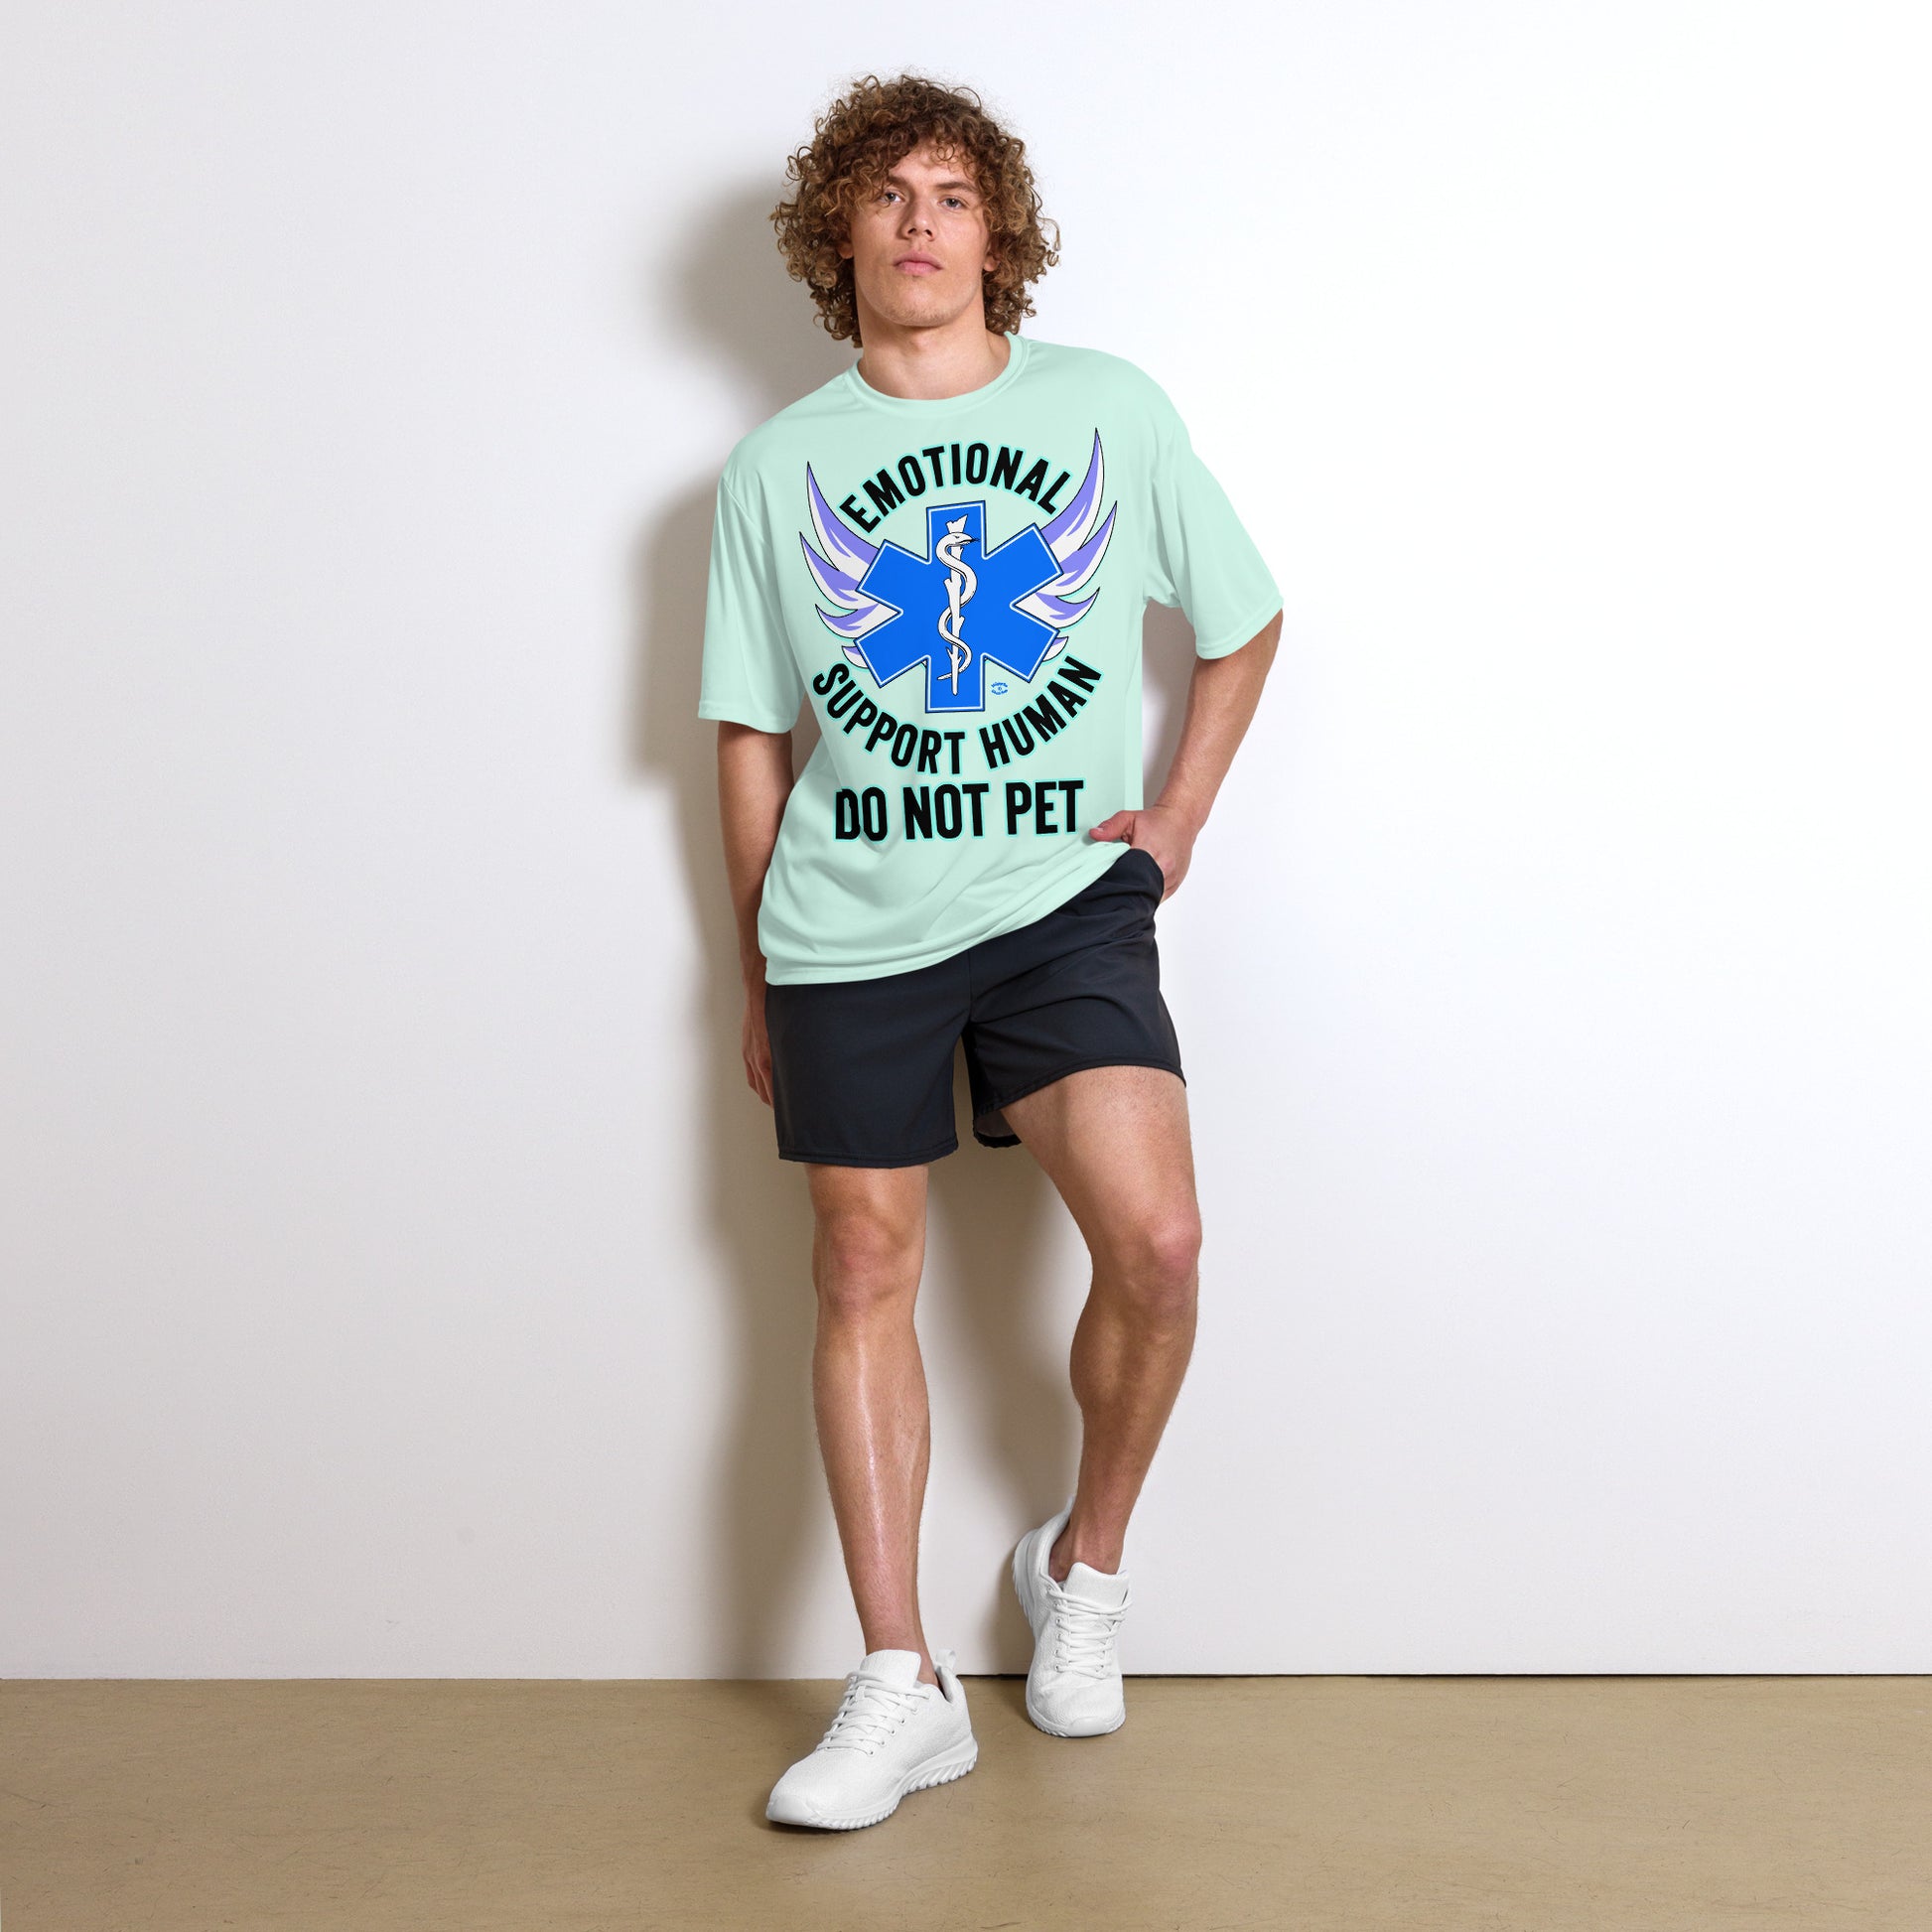 A man wearing a tshirt with a big blue cross and a Rod of Asclepius inside. Text around the cross says Emotional Support Human DO NOT PET - pastel mint